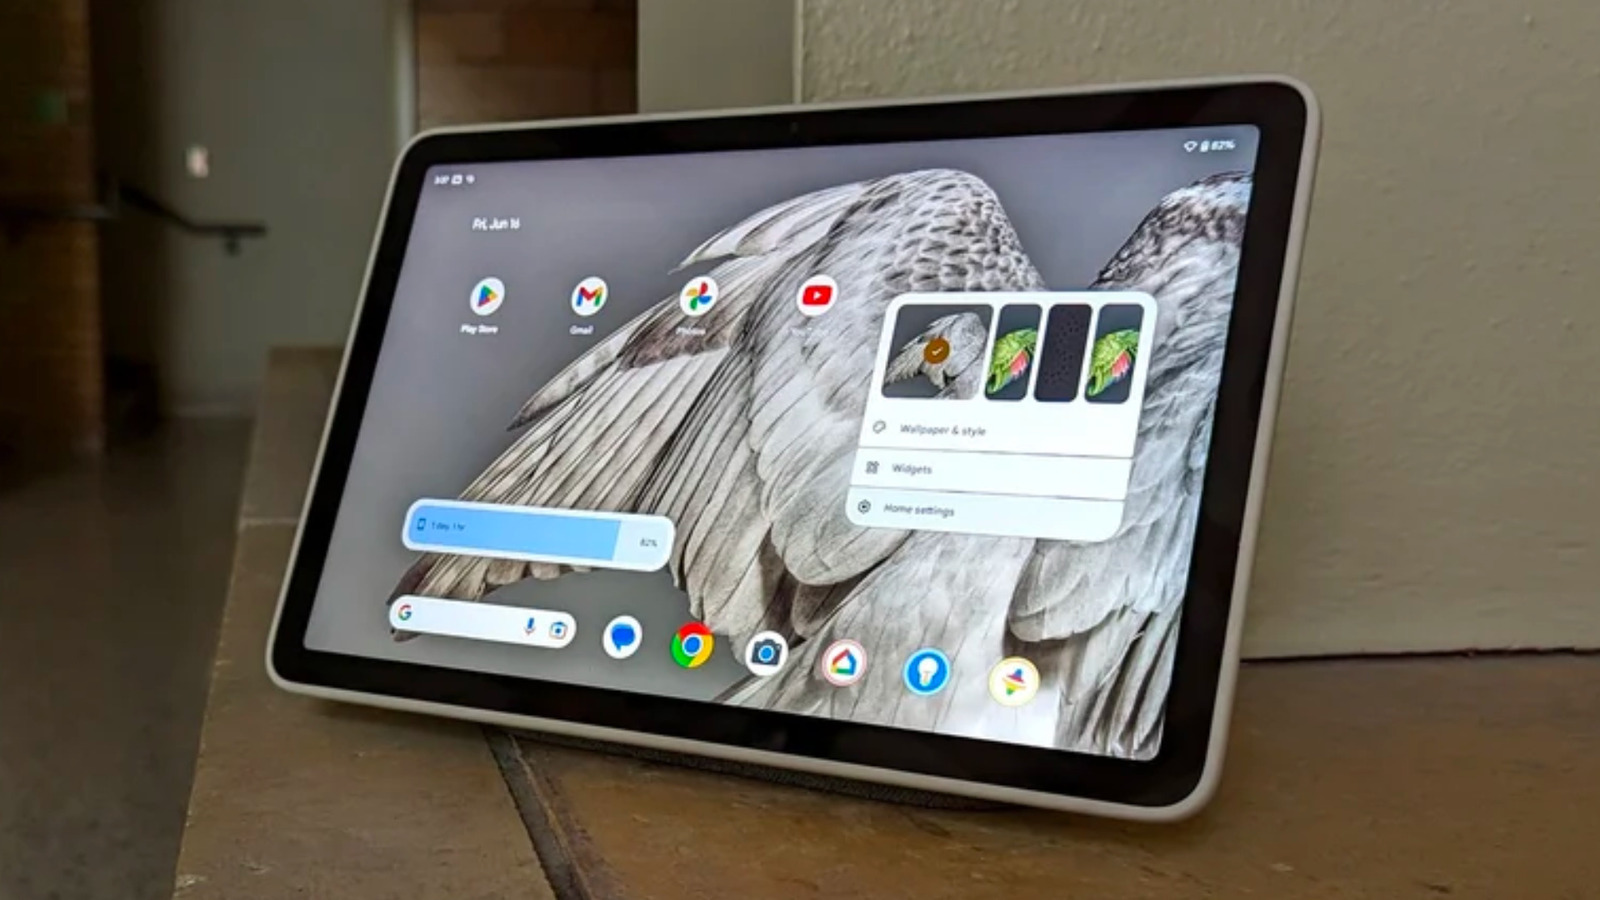 Google Pixel Tablet review: A new home for the same old Android